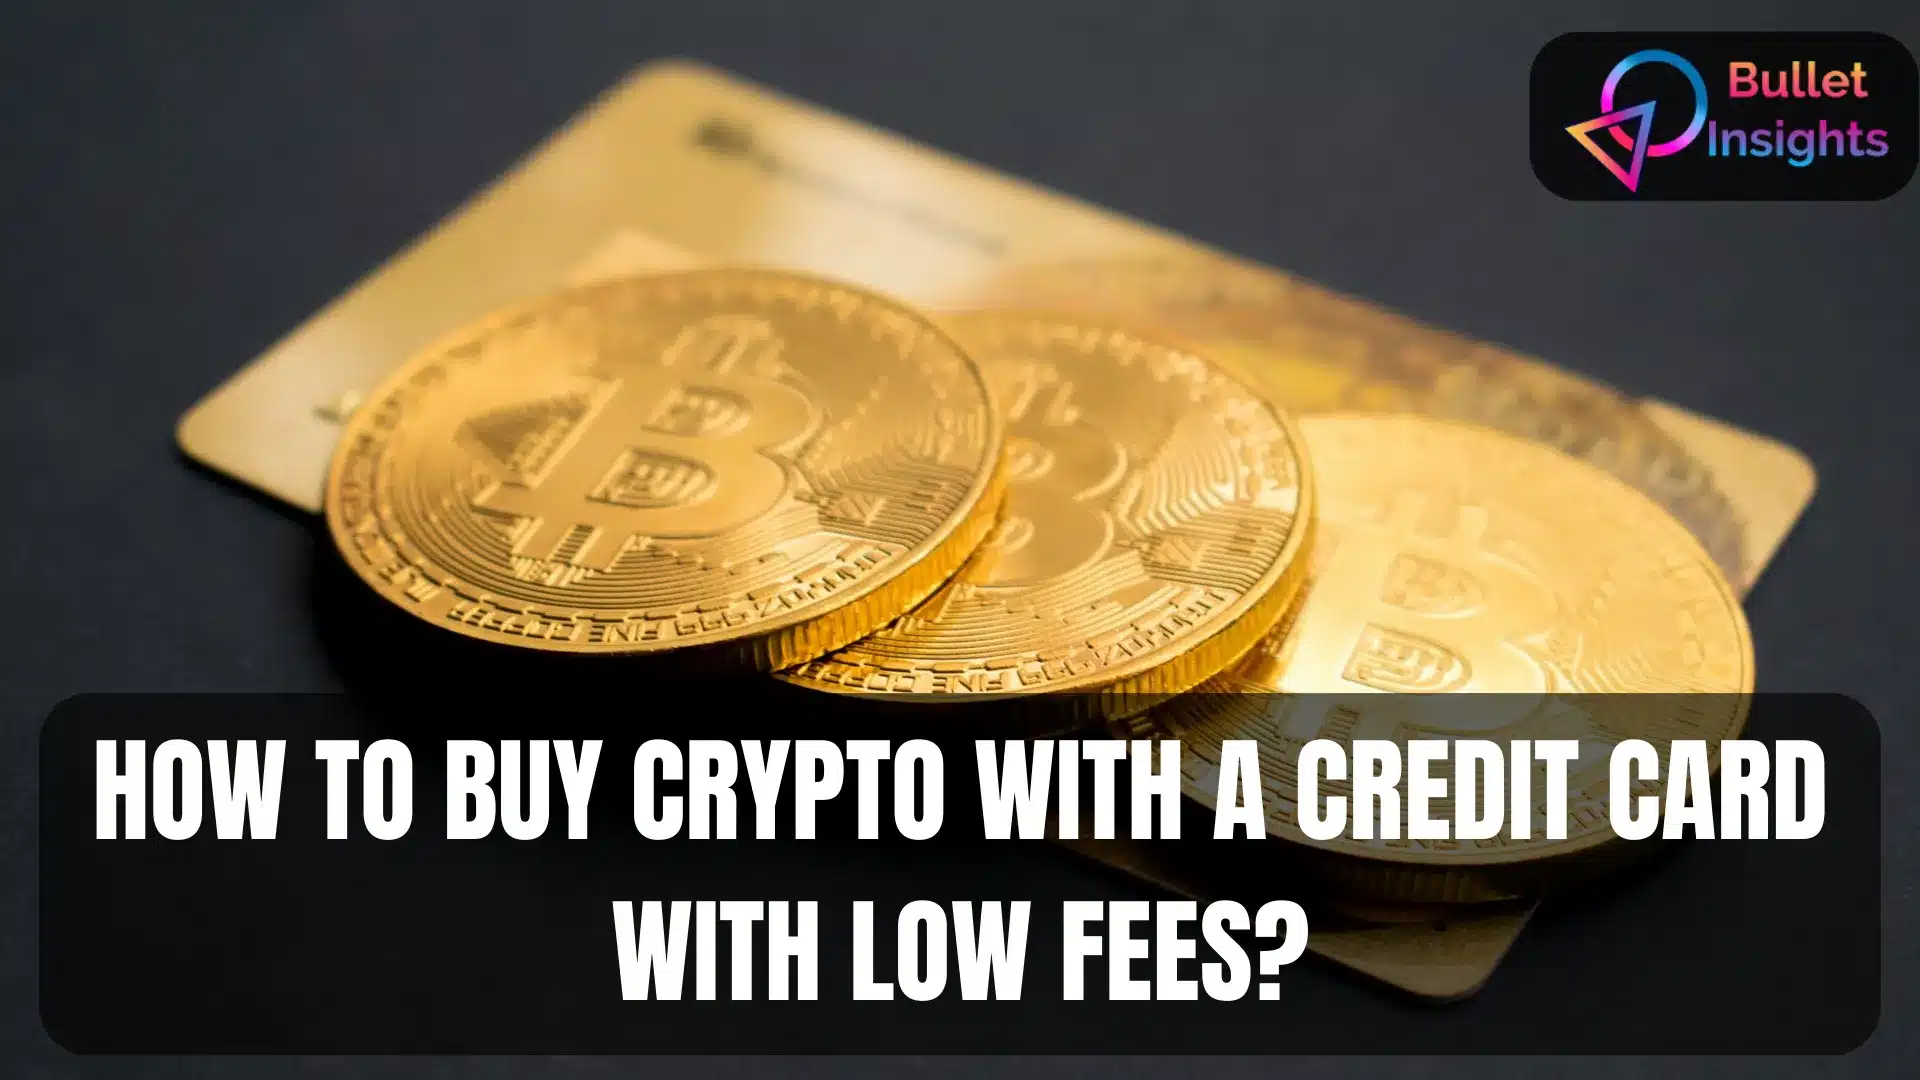 How to buy crypto with a credit card with low fees?